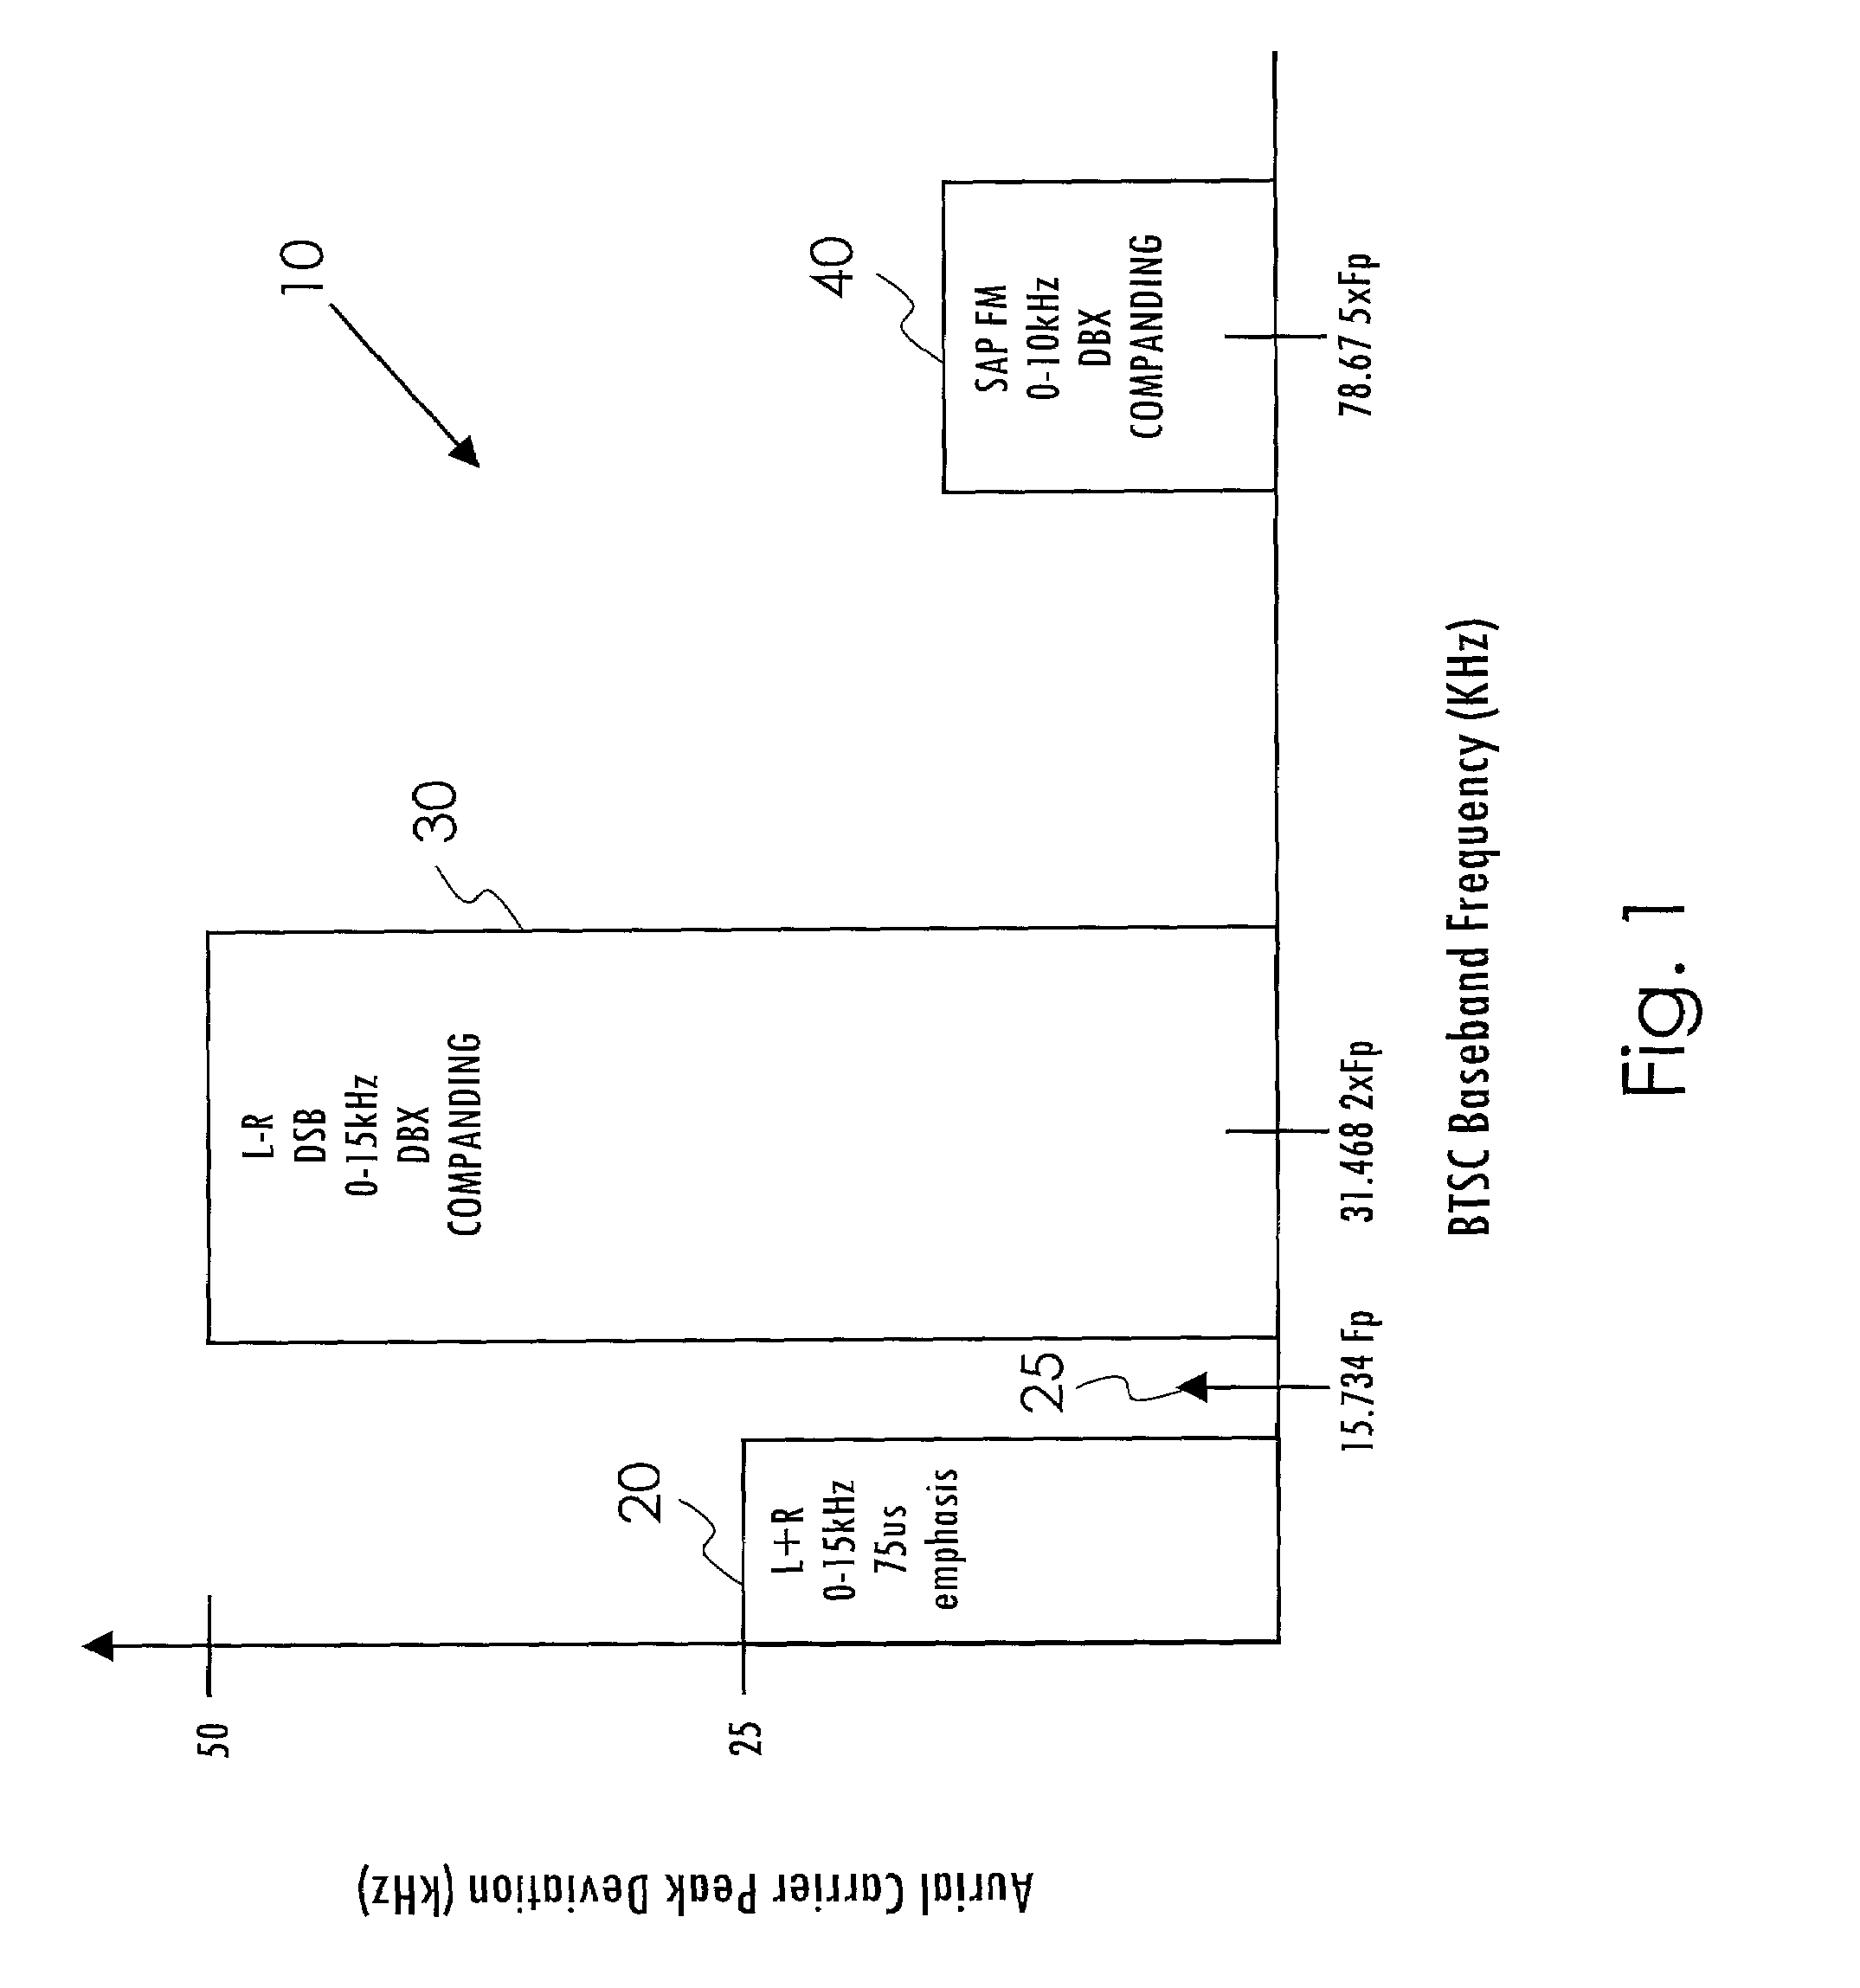 System and method of performing digital multi-channel audio signal decoding